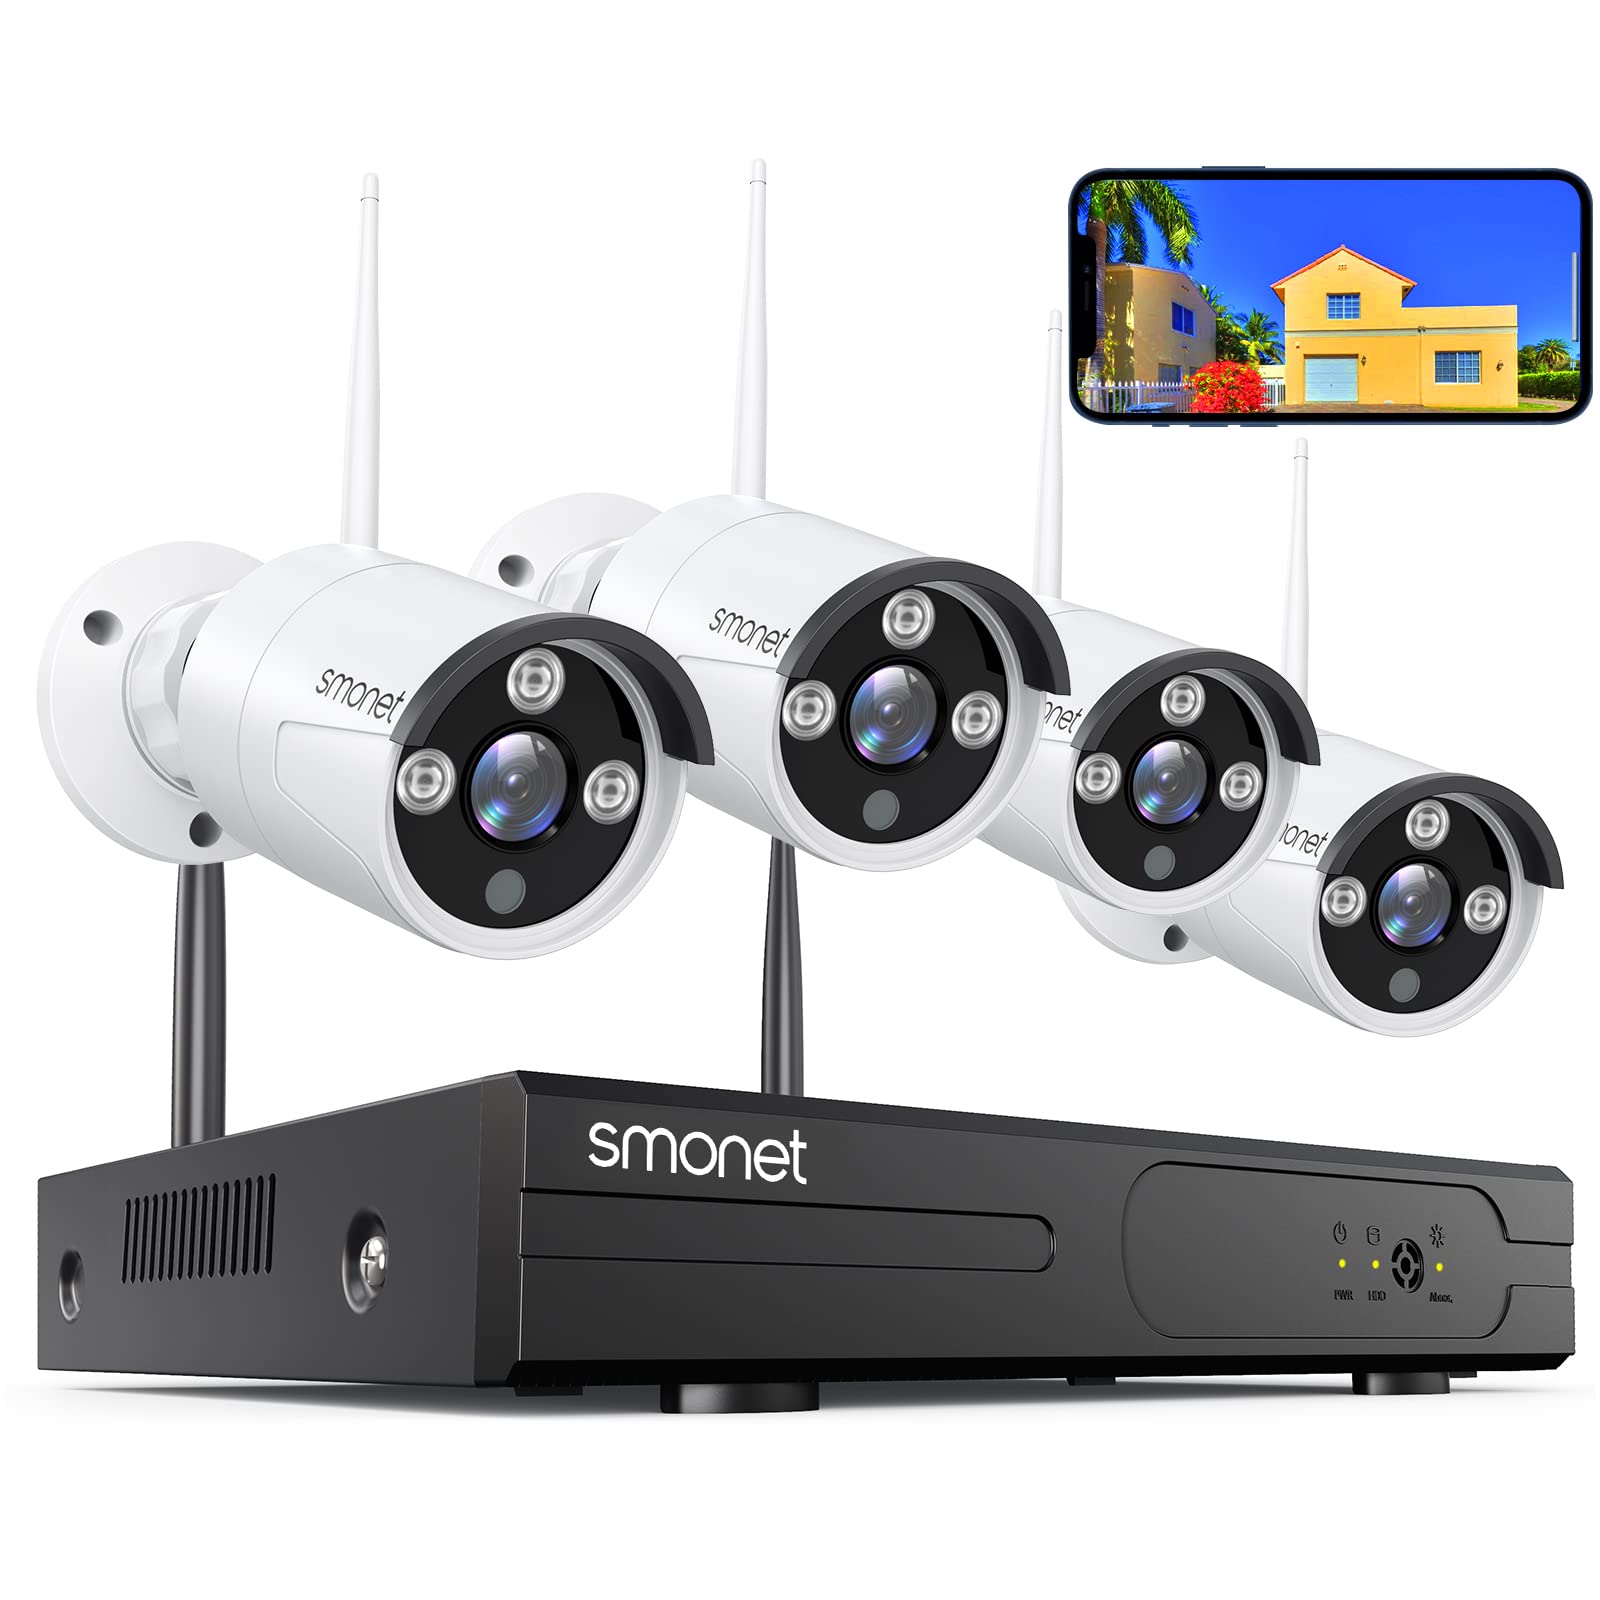 3MP Wireless Security Camera System with Audio,SMONET 8CH Home Surveillance NVR Kits,4pcs 3MP Indoor Outdoor WiFi IP Cameras,P2P CCTV Camera System...